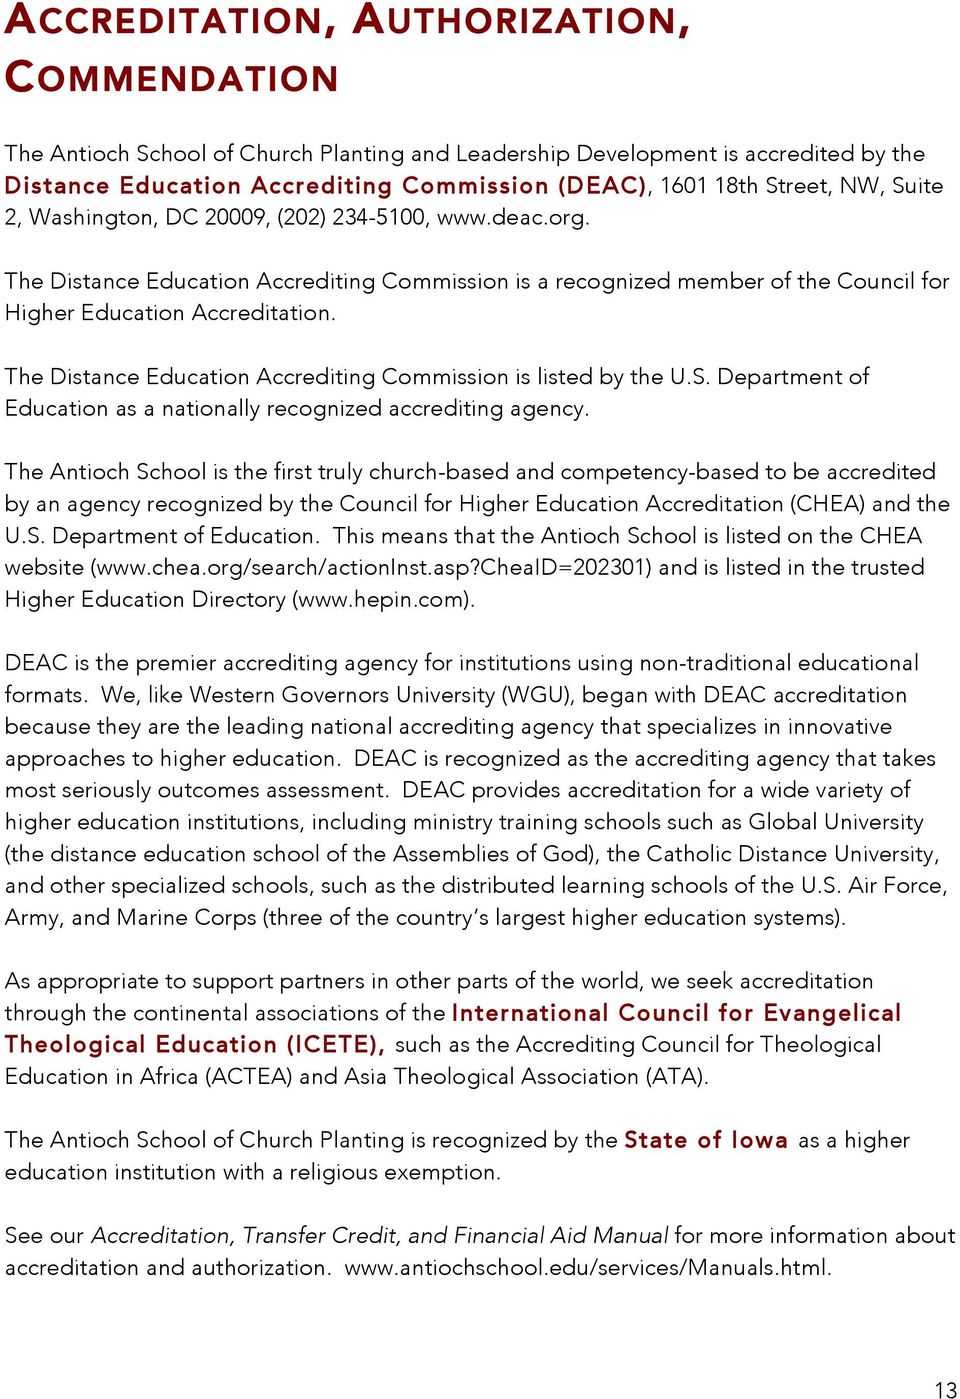 The Distance Education Accrediting Commission is listed by the U.S. Department of Education as a nationally recognized accrediting agency.